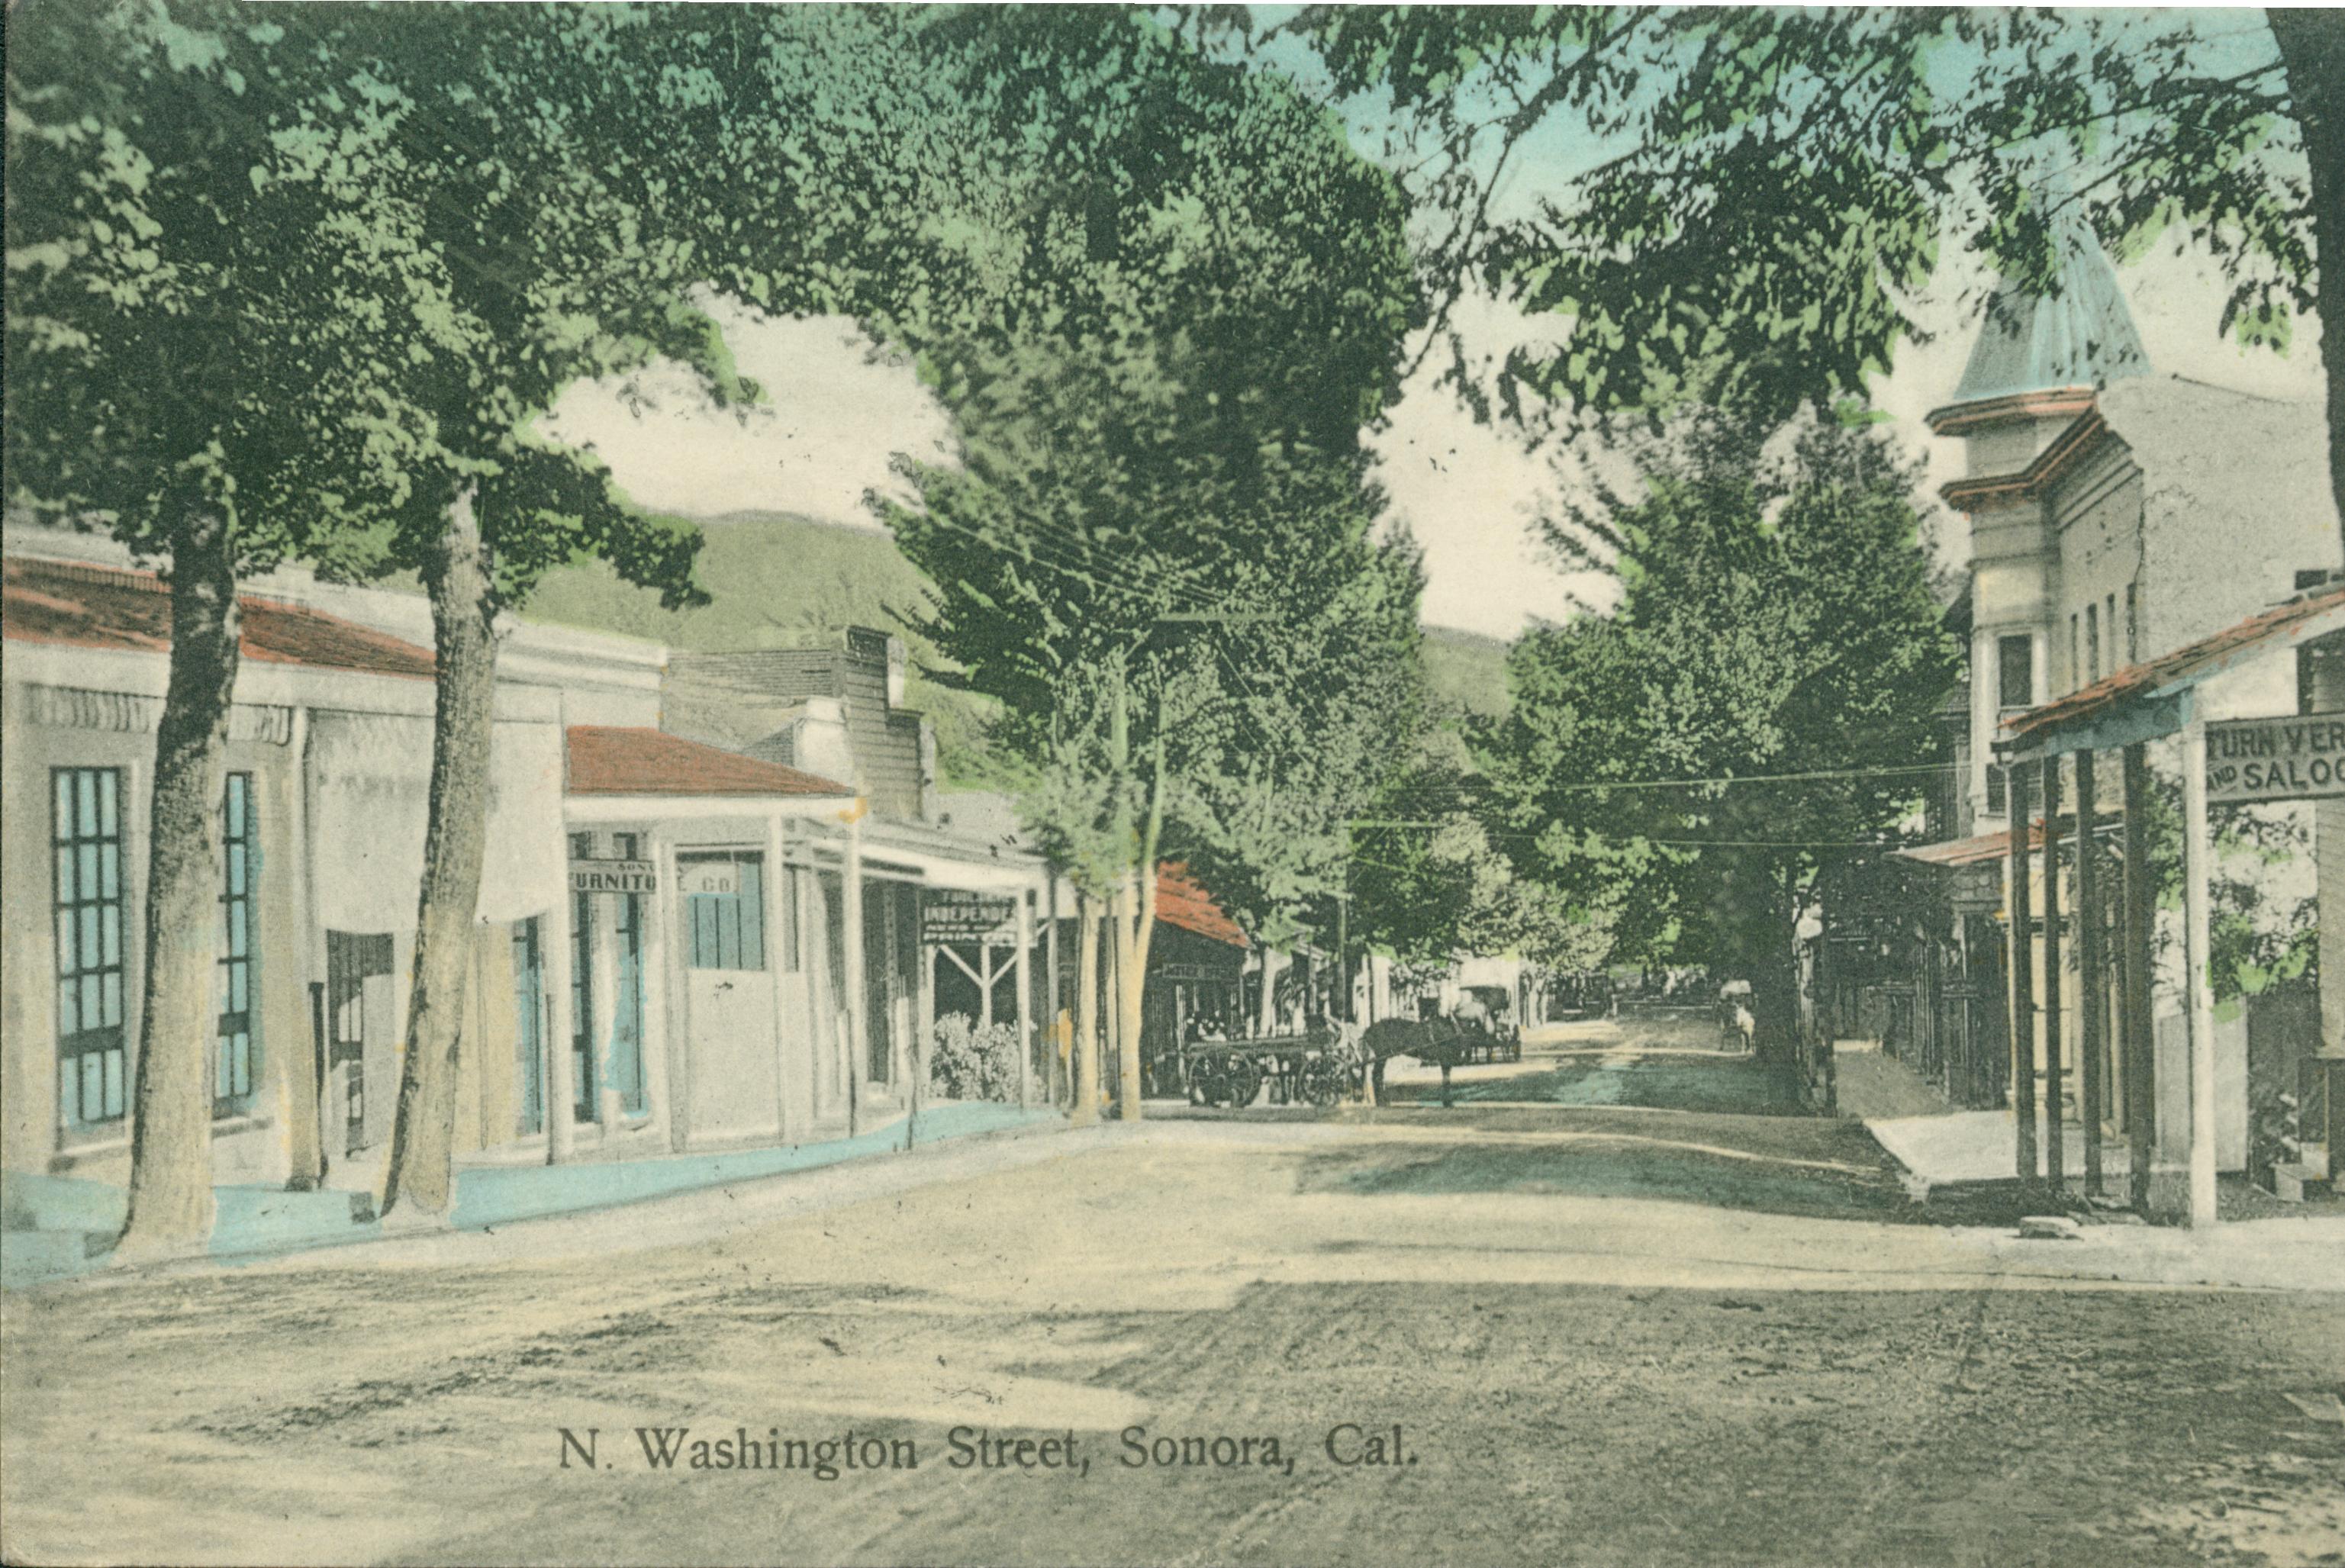 Shows Washington Street in Sonora lined with buildings and trees